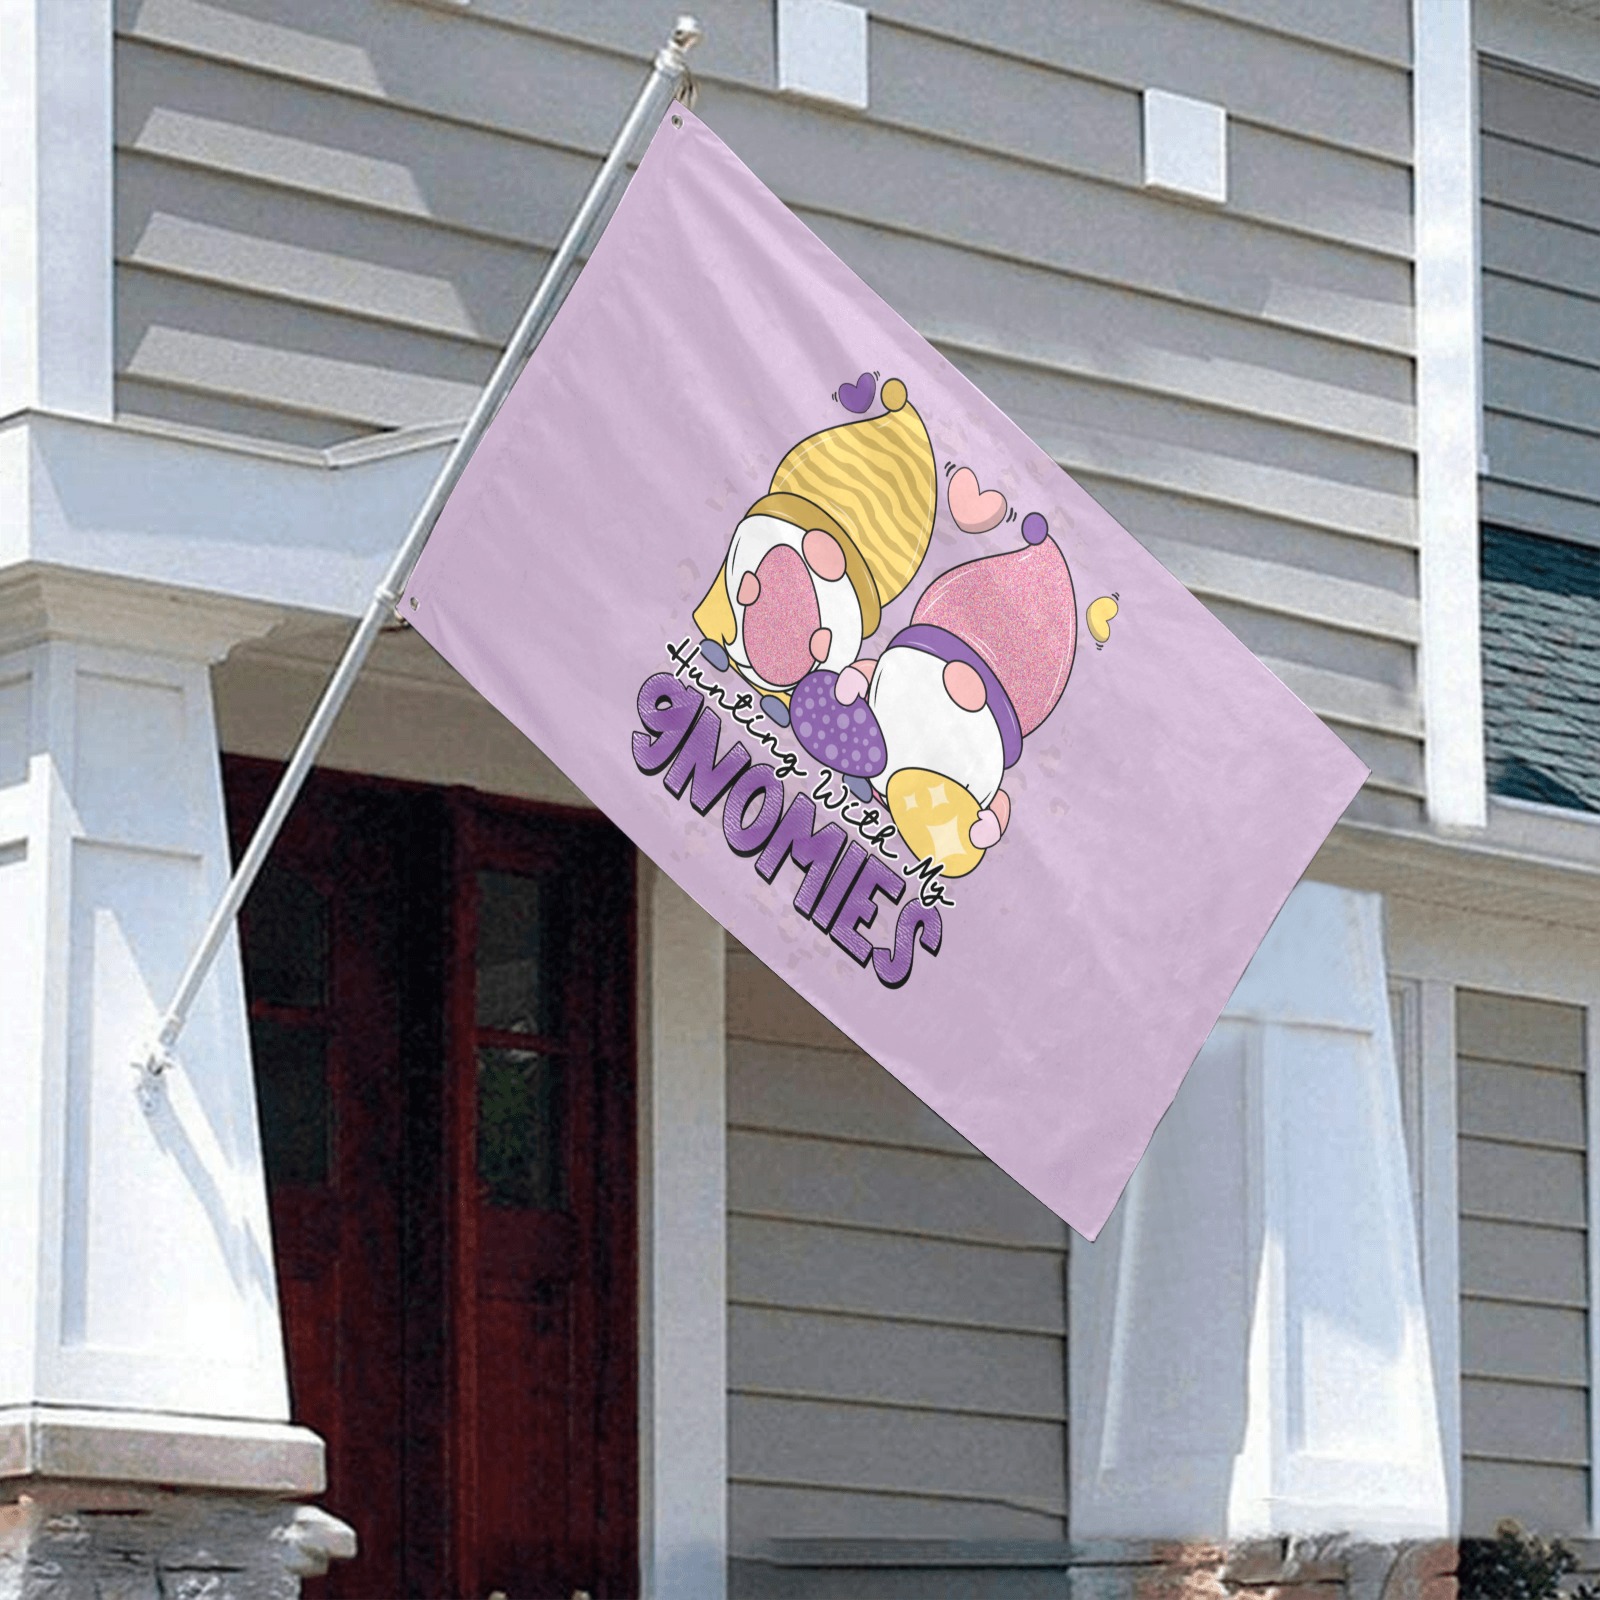 Easter Egg Hunting With My Gnomes Garden Flag 59"x35"